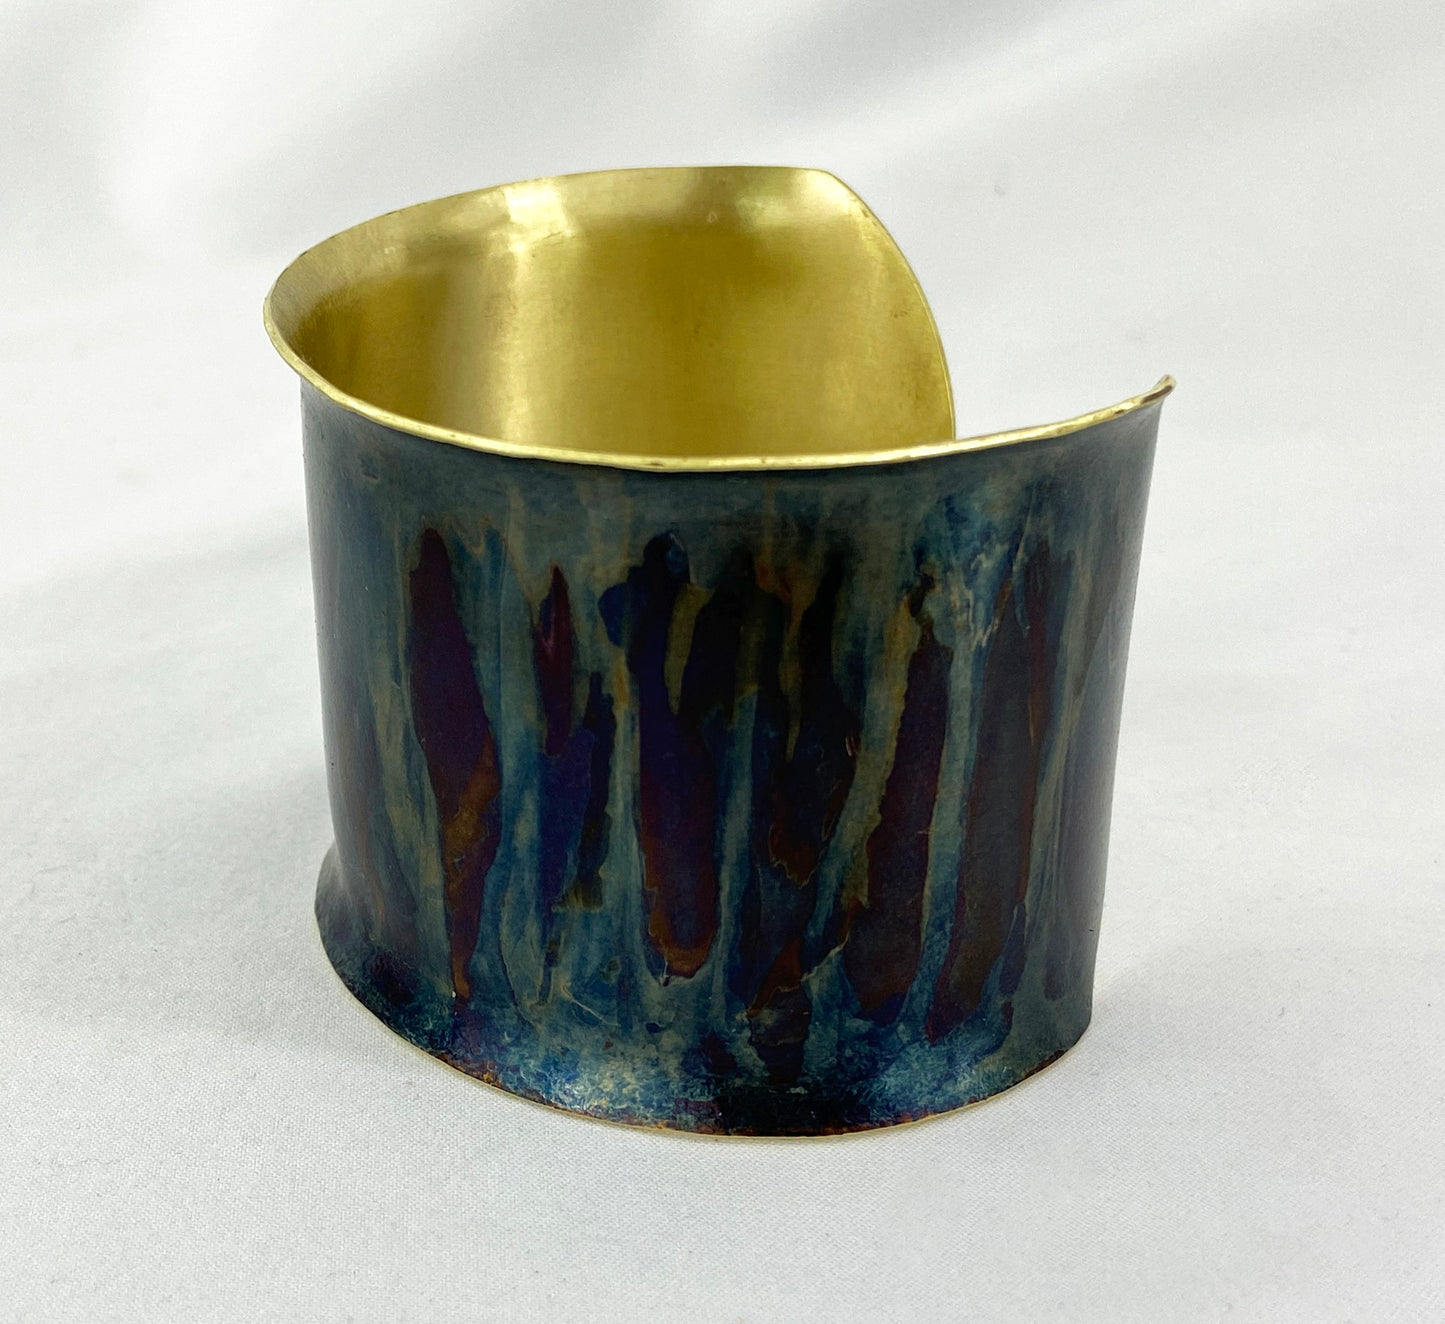 Flanged Brass Cuff with Torched Blue Patina